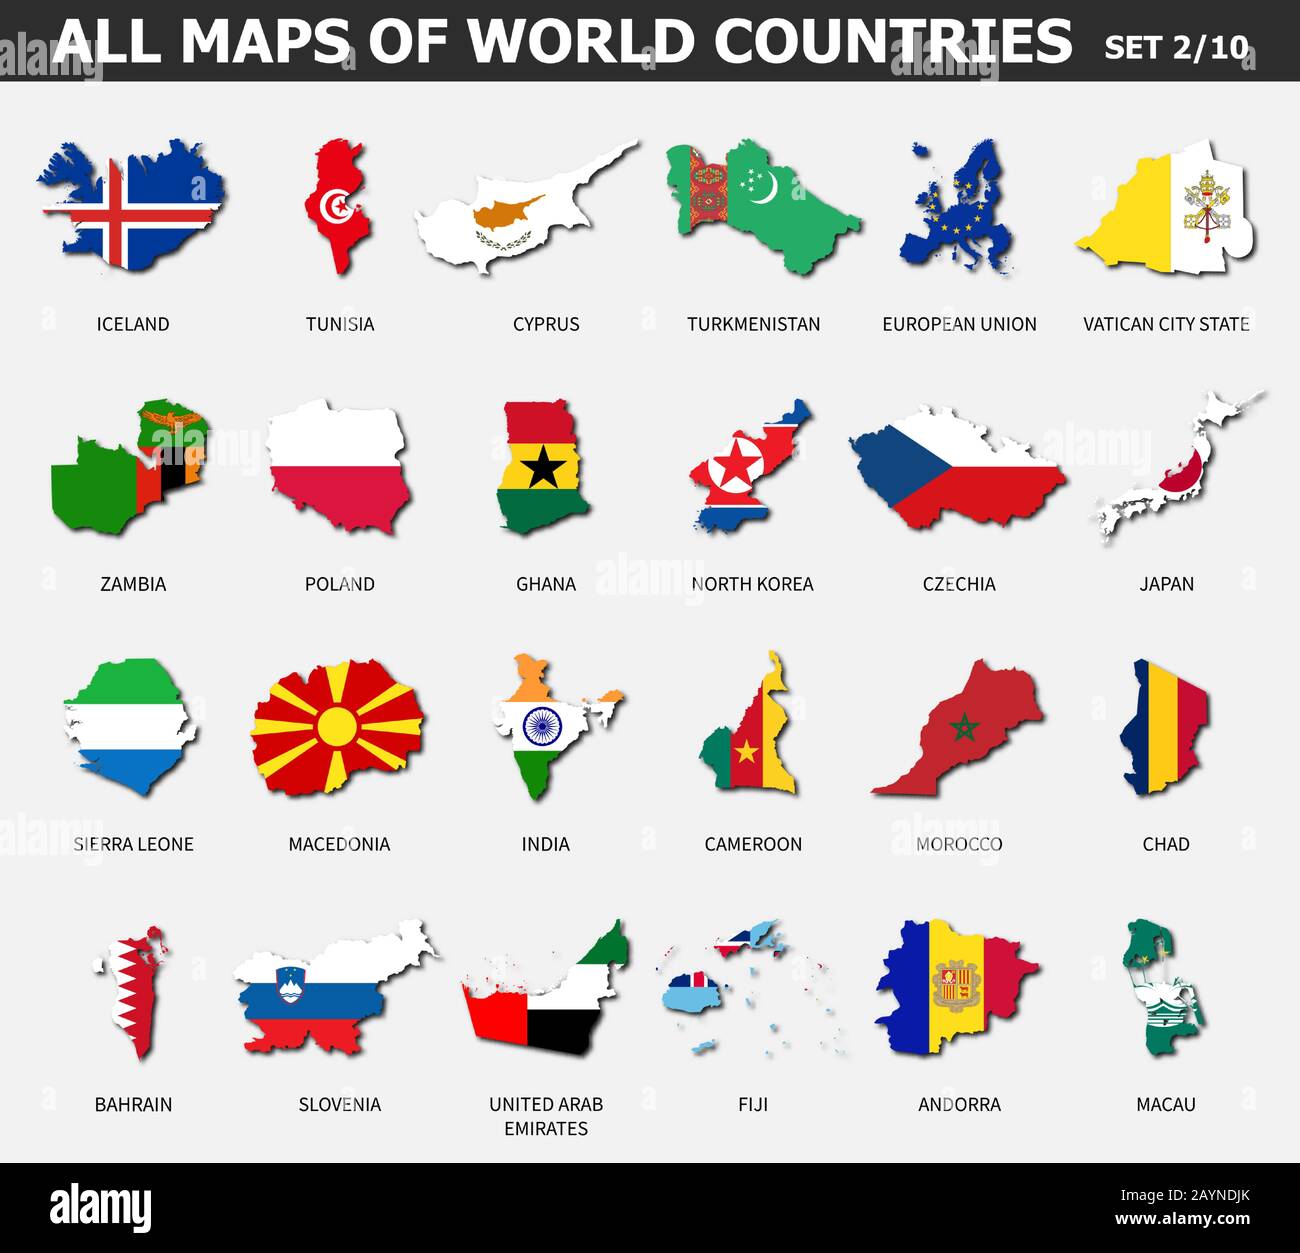 All Maps Of World Countries And Flags Set 2 Of 10 Collection Of